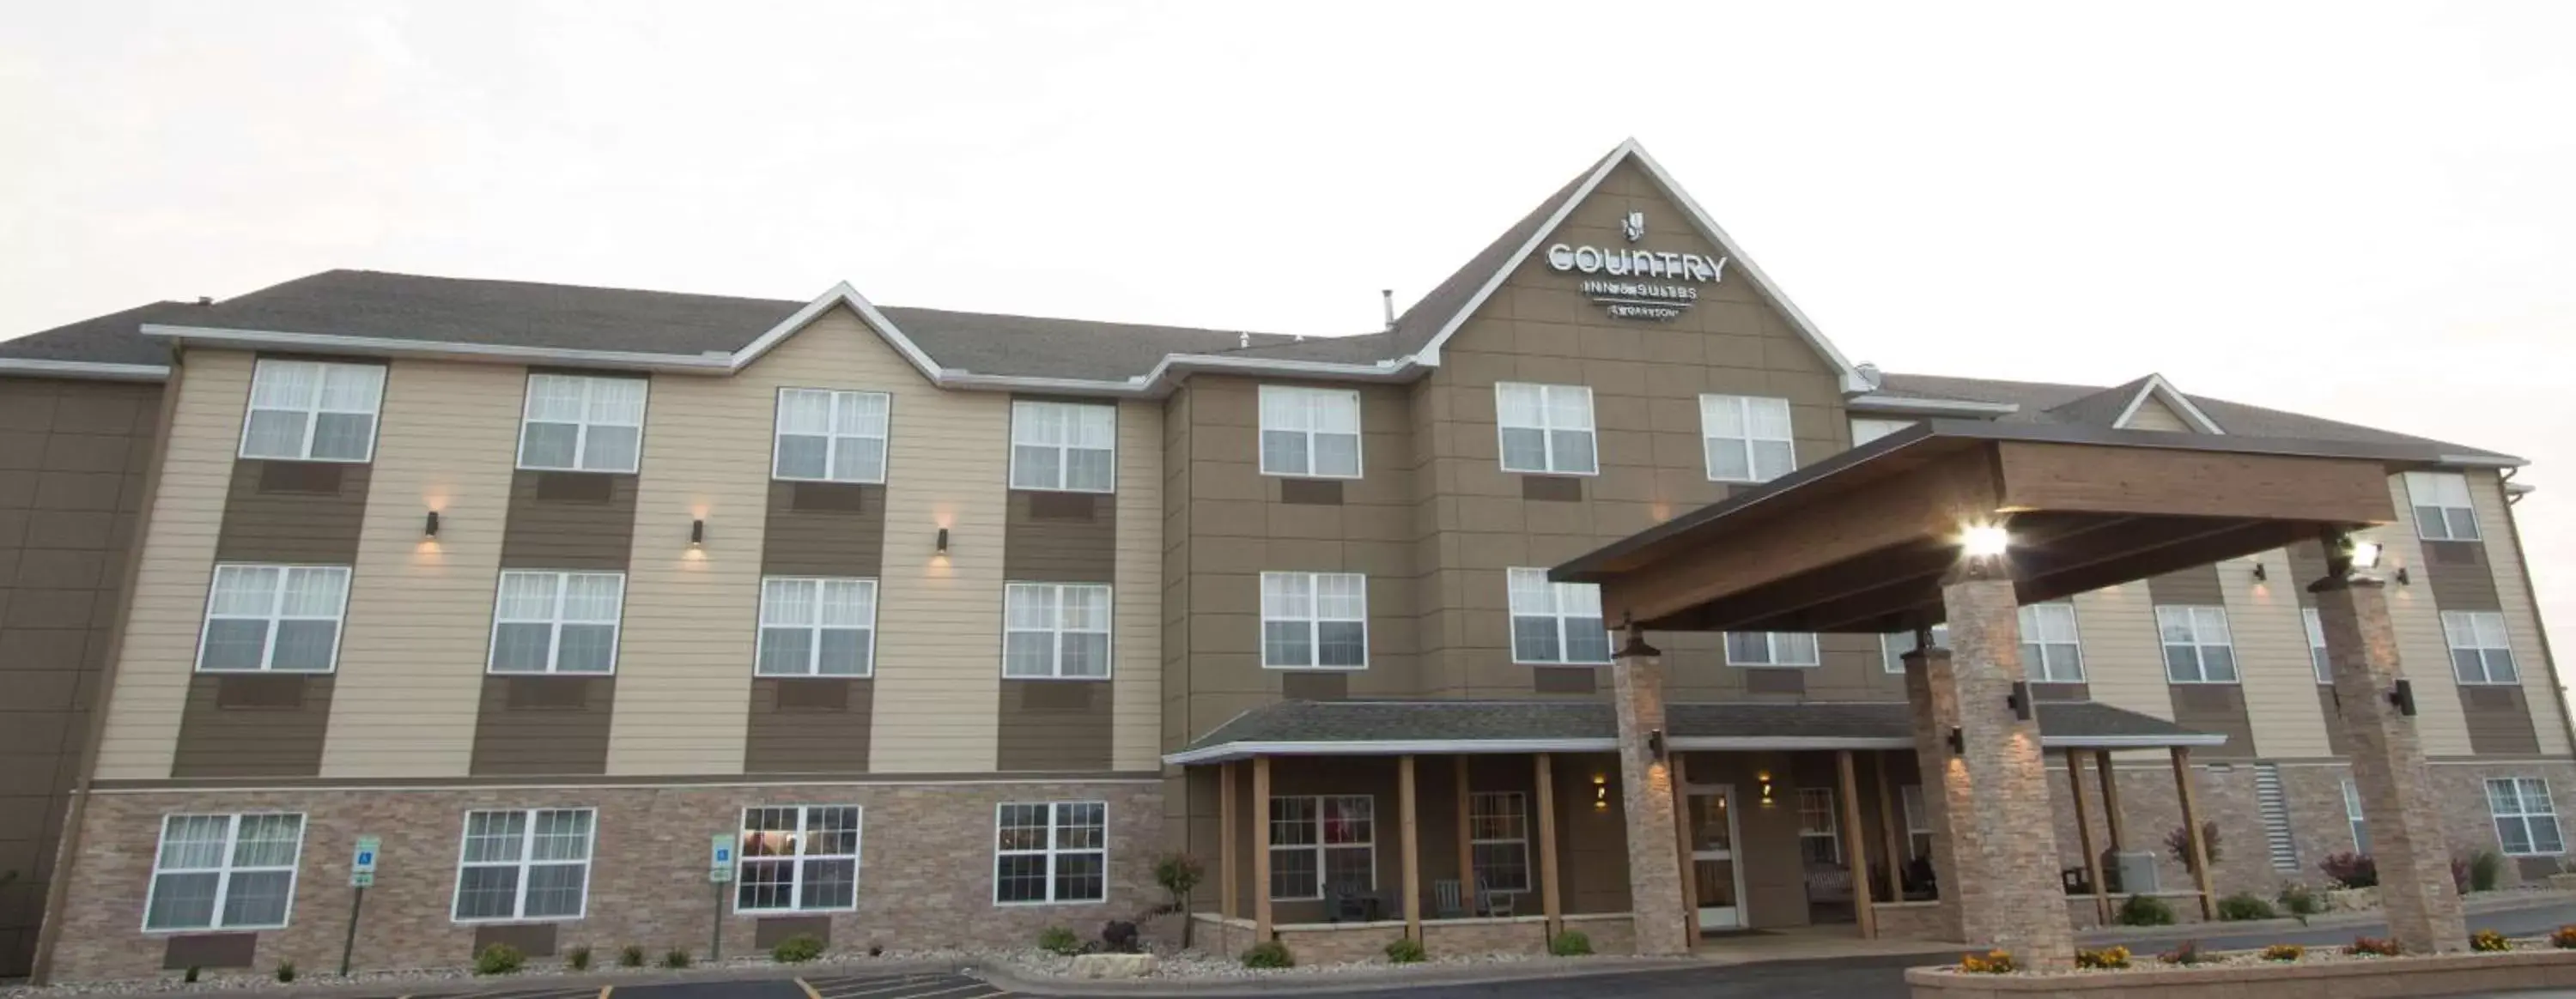 Property Building in Country Inn & Suites by Radisson, Moline Airport, IL